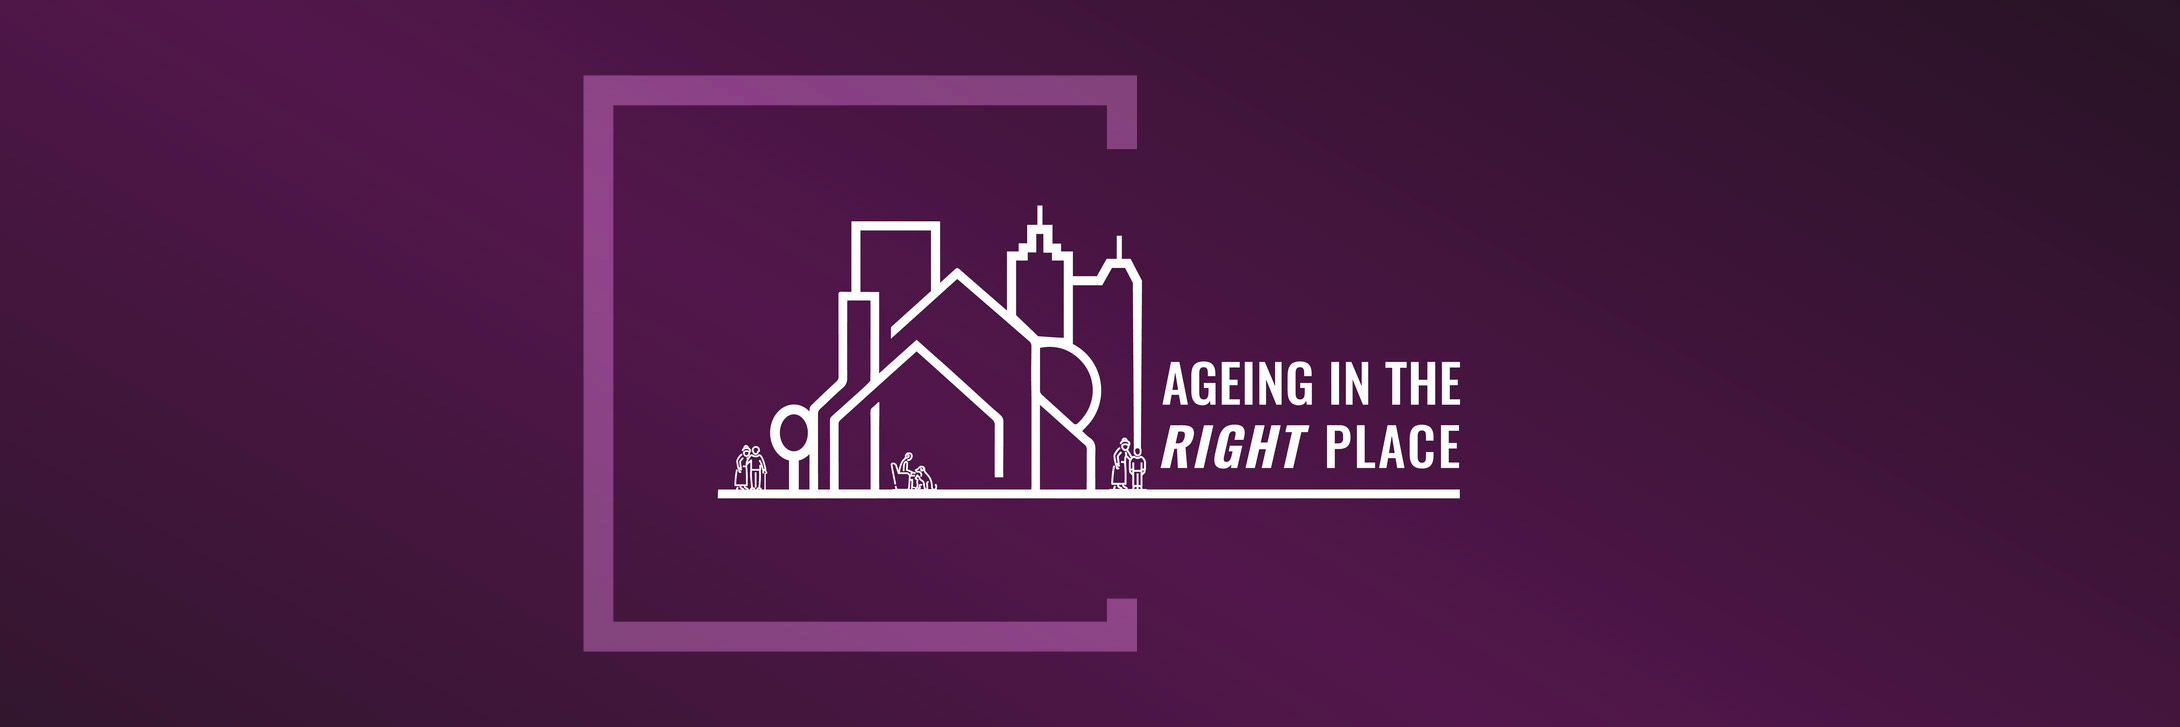 Ageing in the Right Place